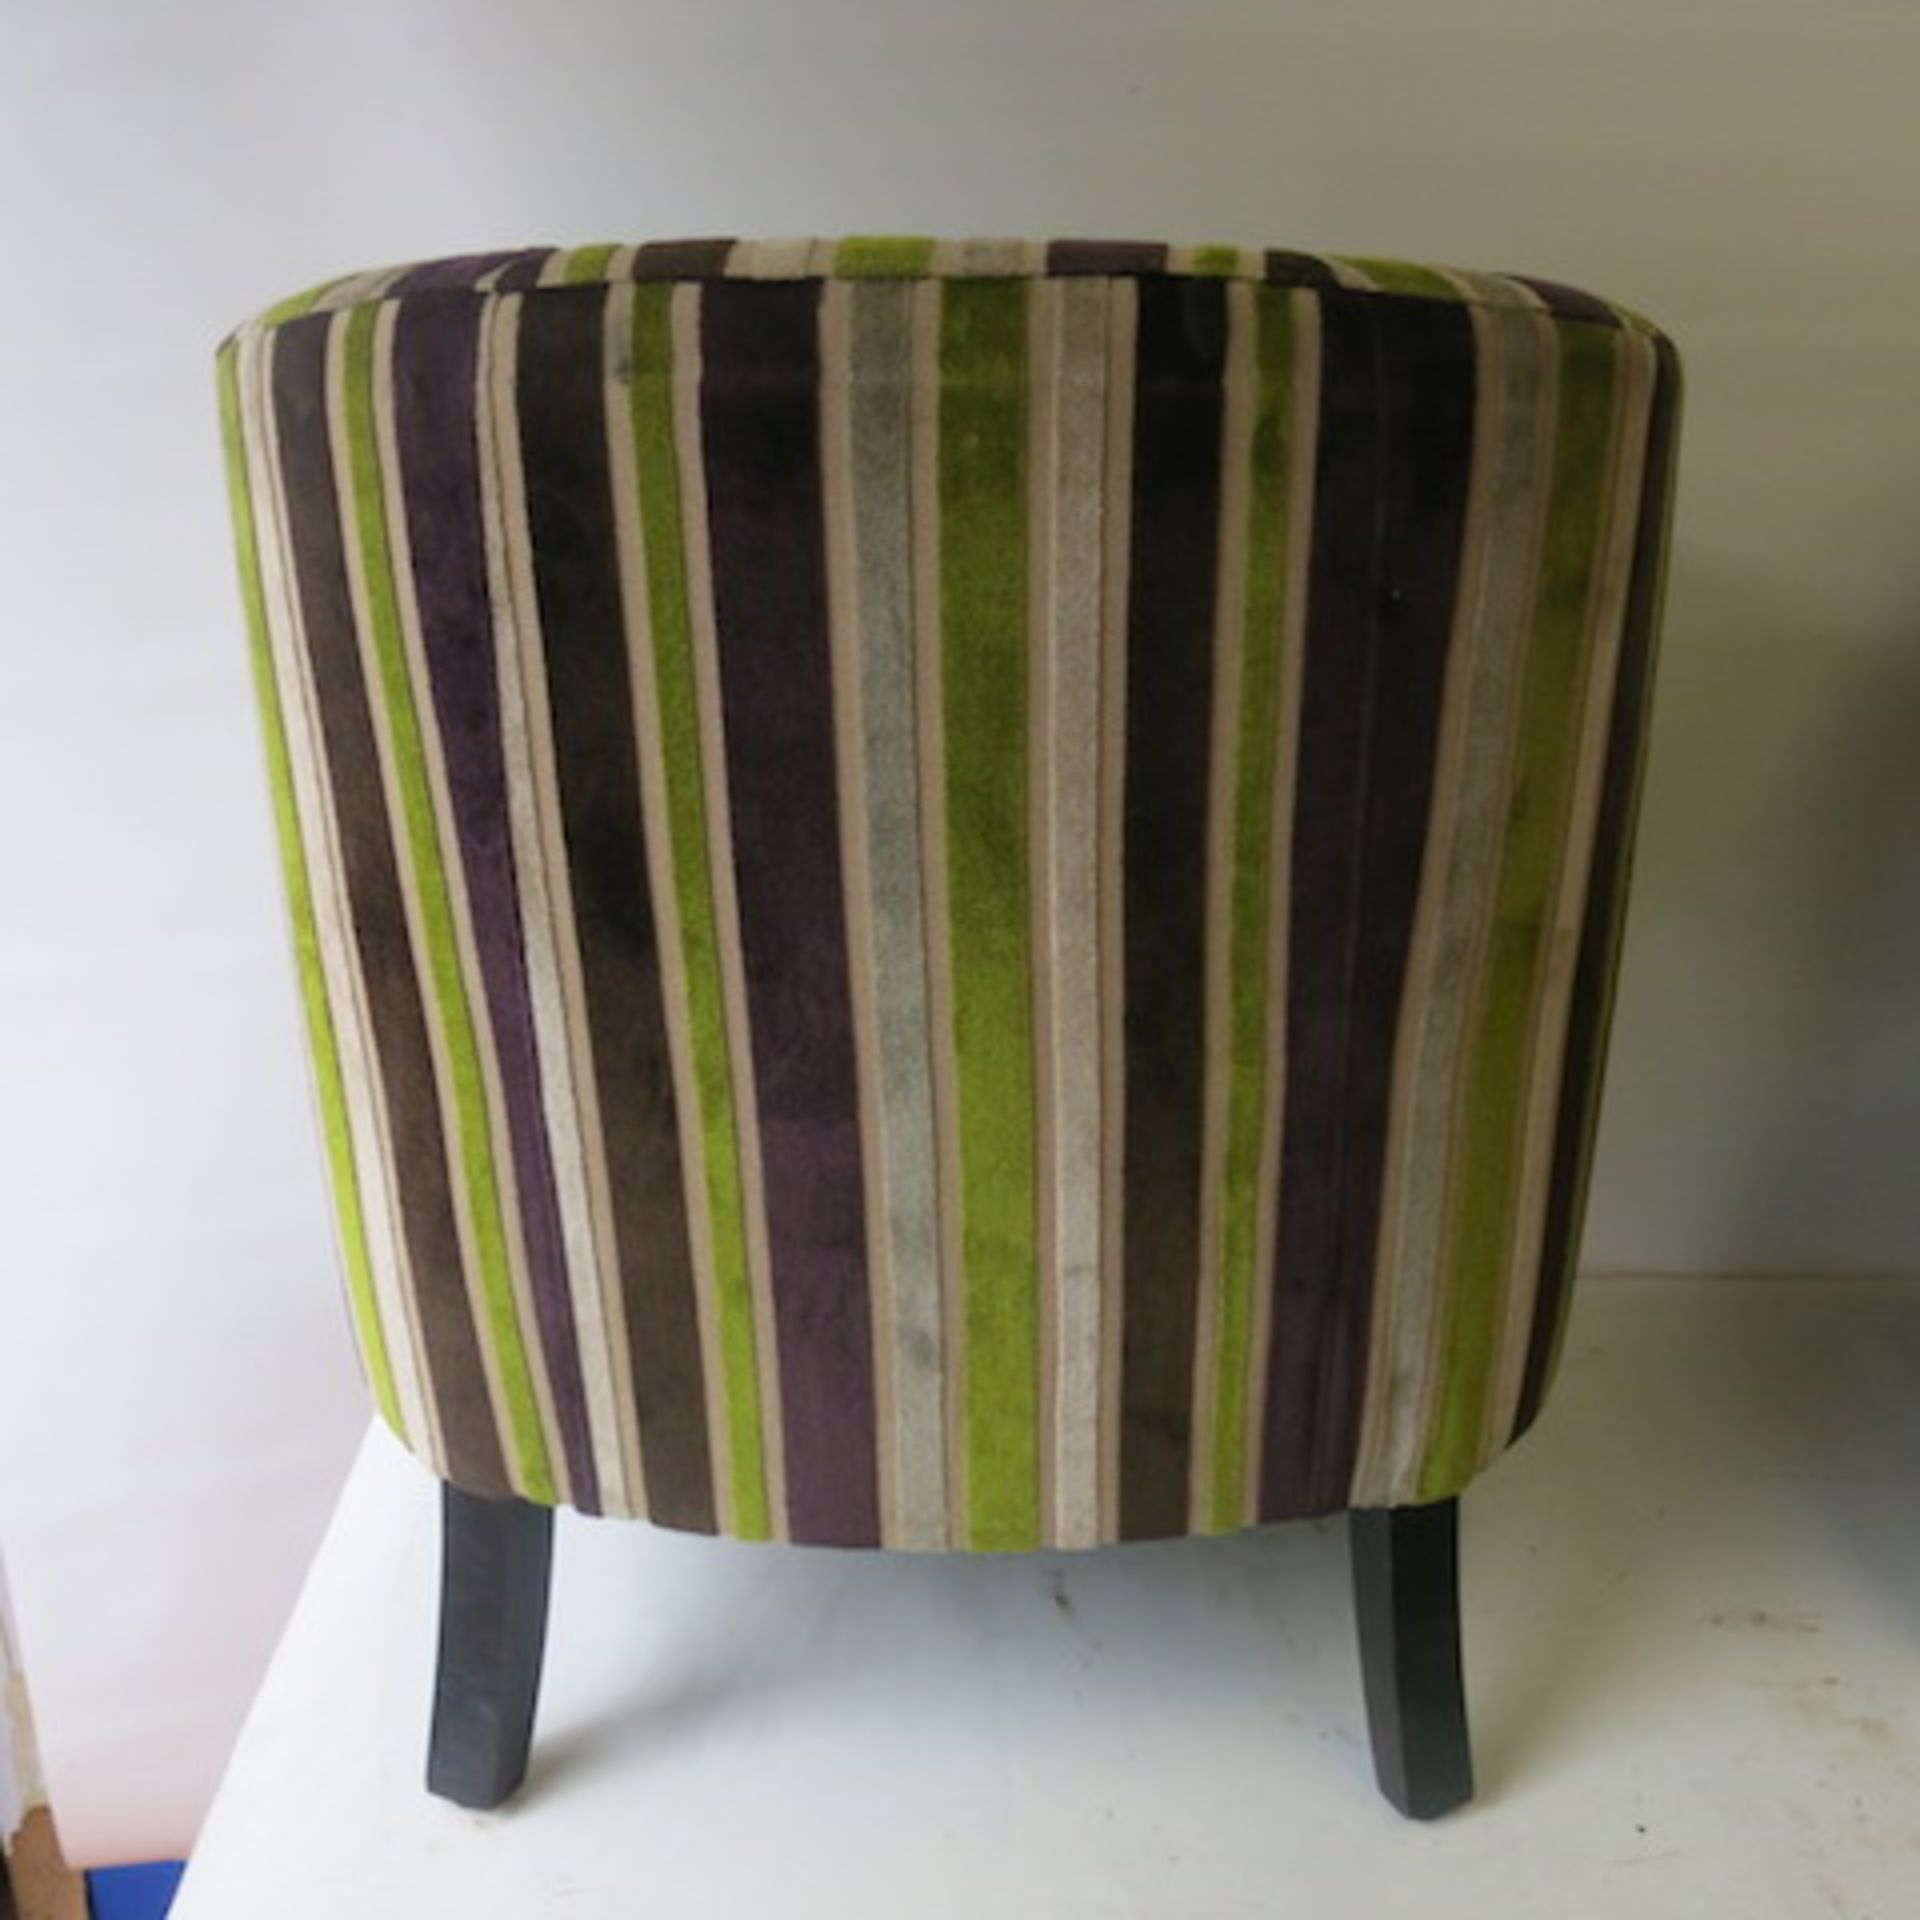 2 x Matching Crushed Velour Tub Chairs with Faux Leather Seat, in Striped Lime/Purple & Beige - Image 5 of 6